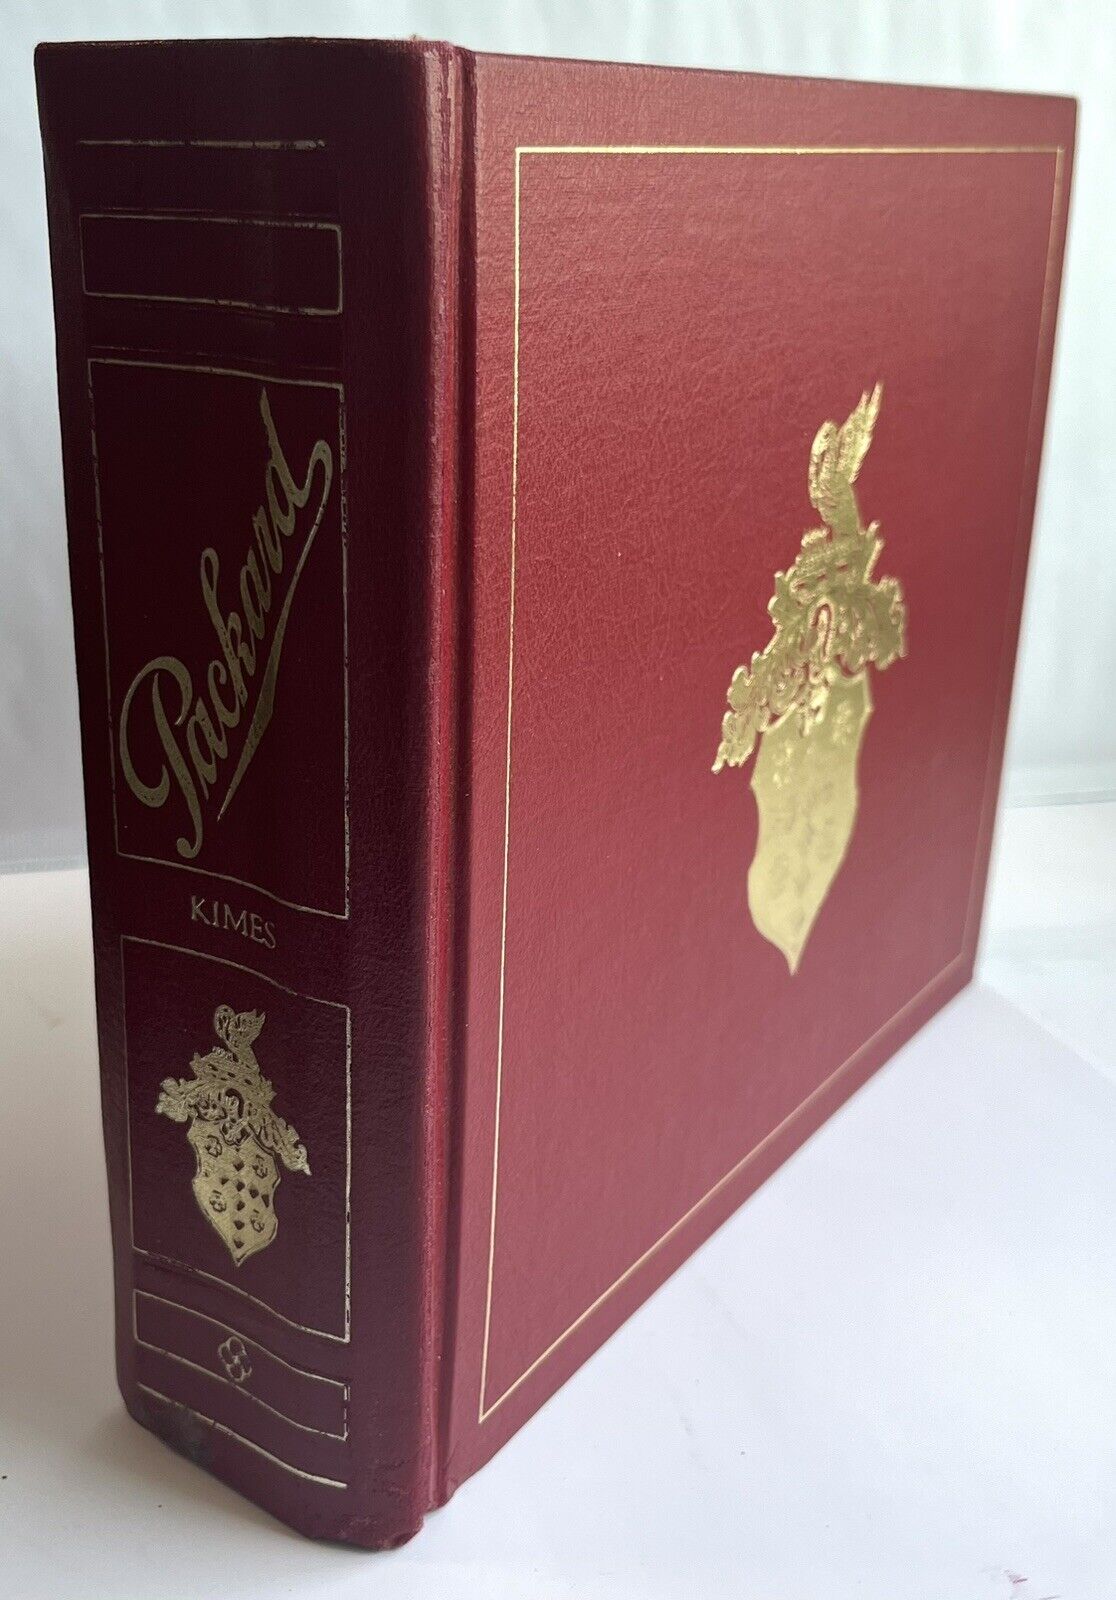 Packard A History Of The Motor Car & The Company First Edition, #35, Limited Ed.